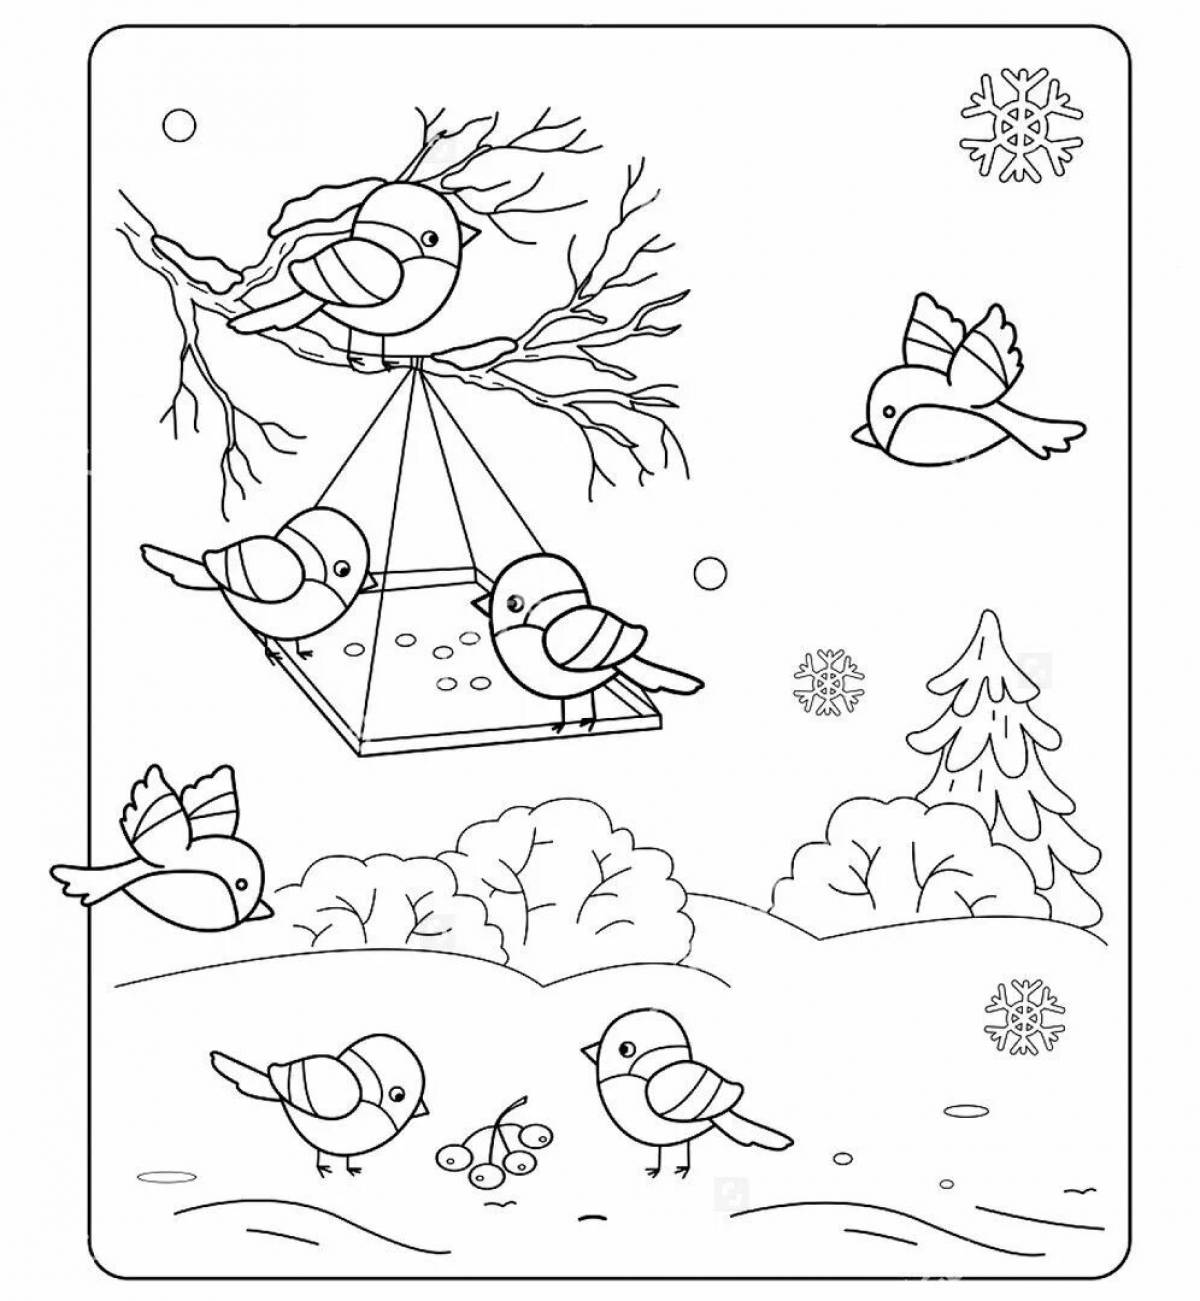 Elegant winter birds coloring book for children 6-7 years old